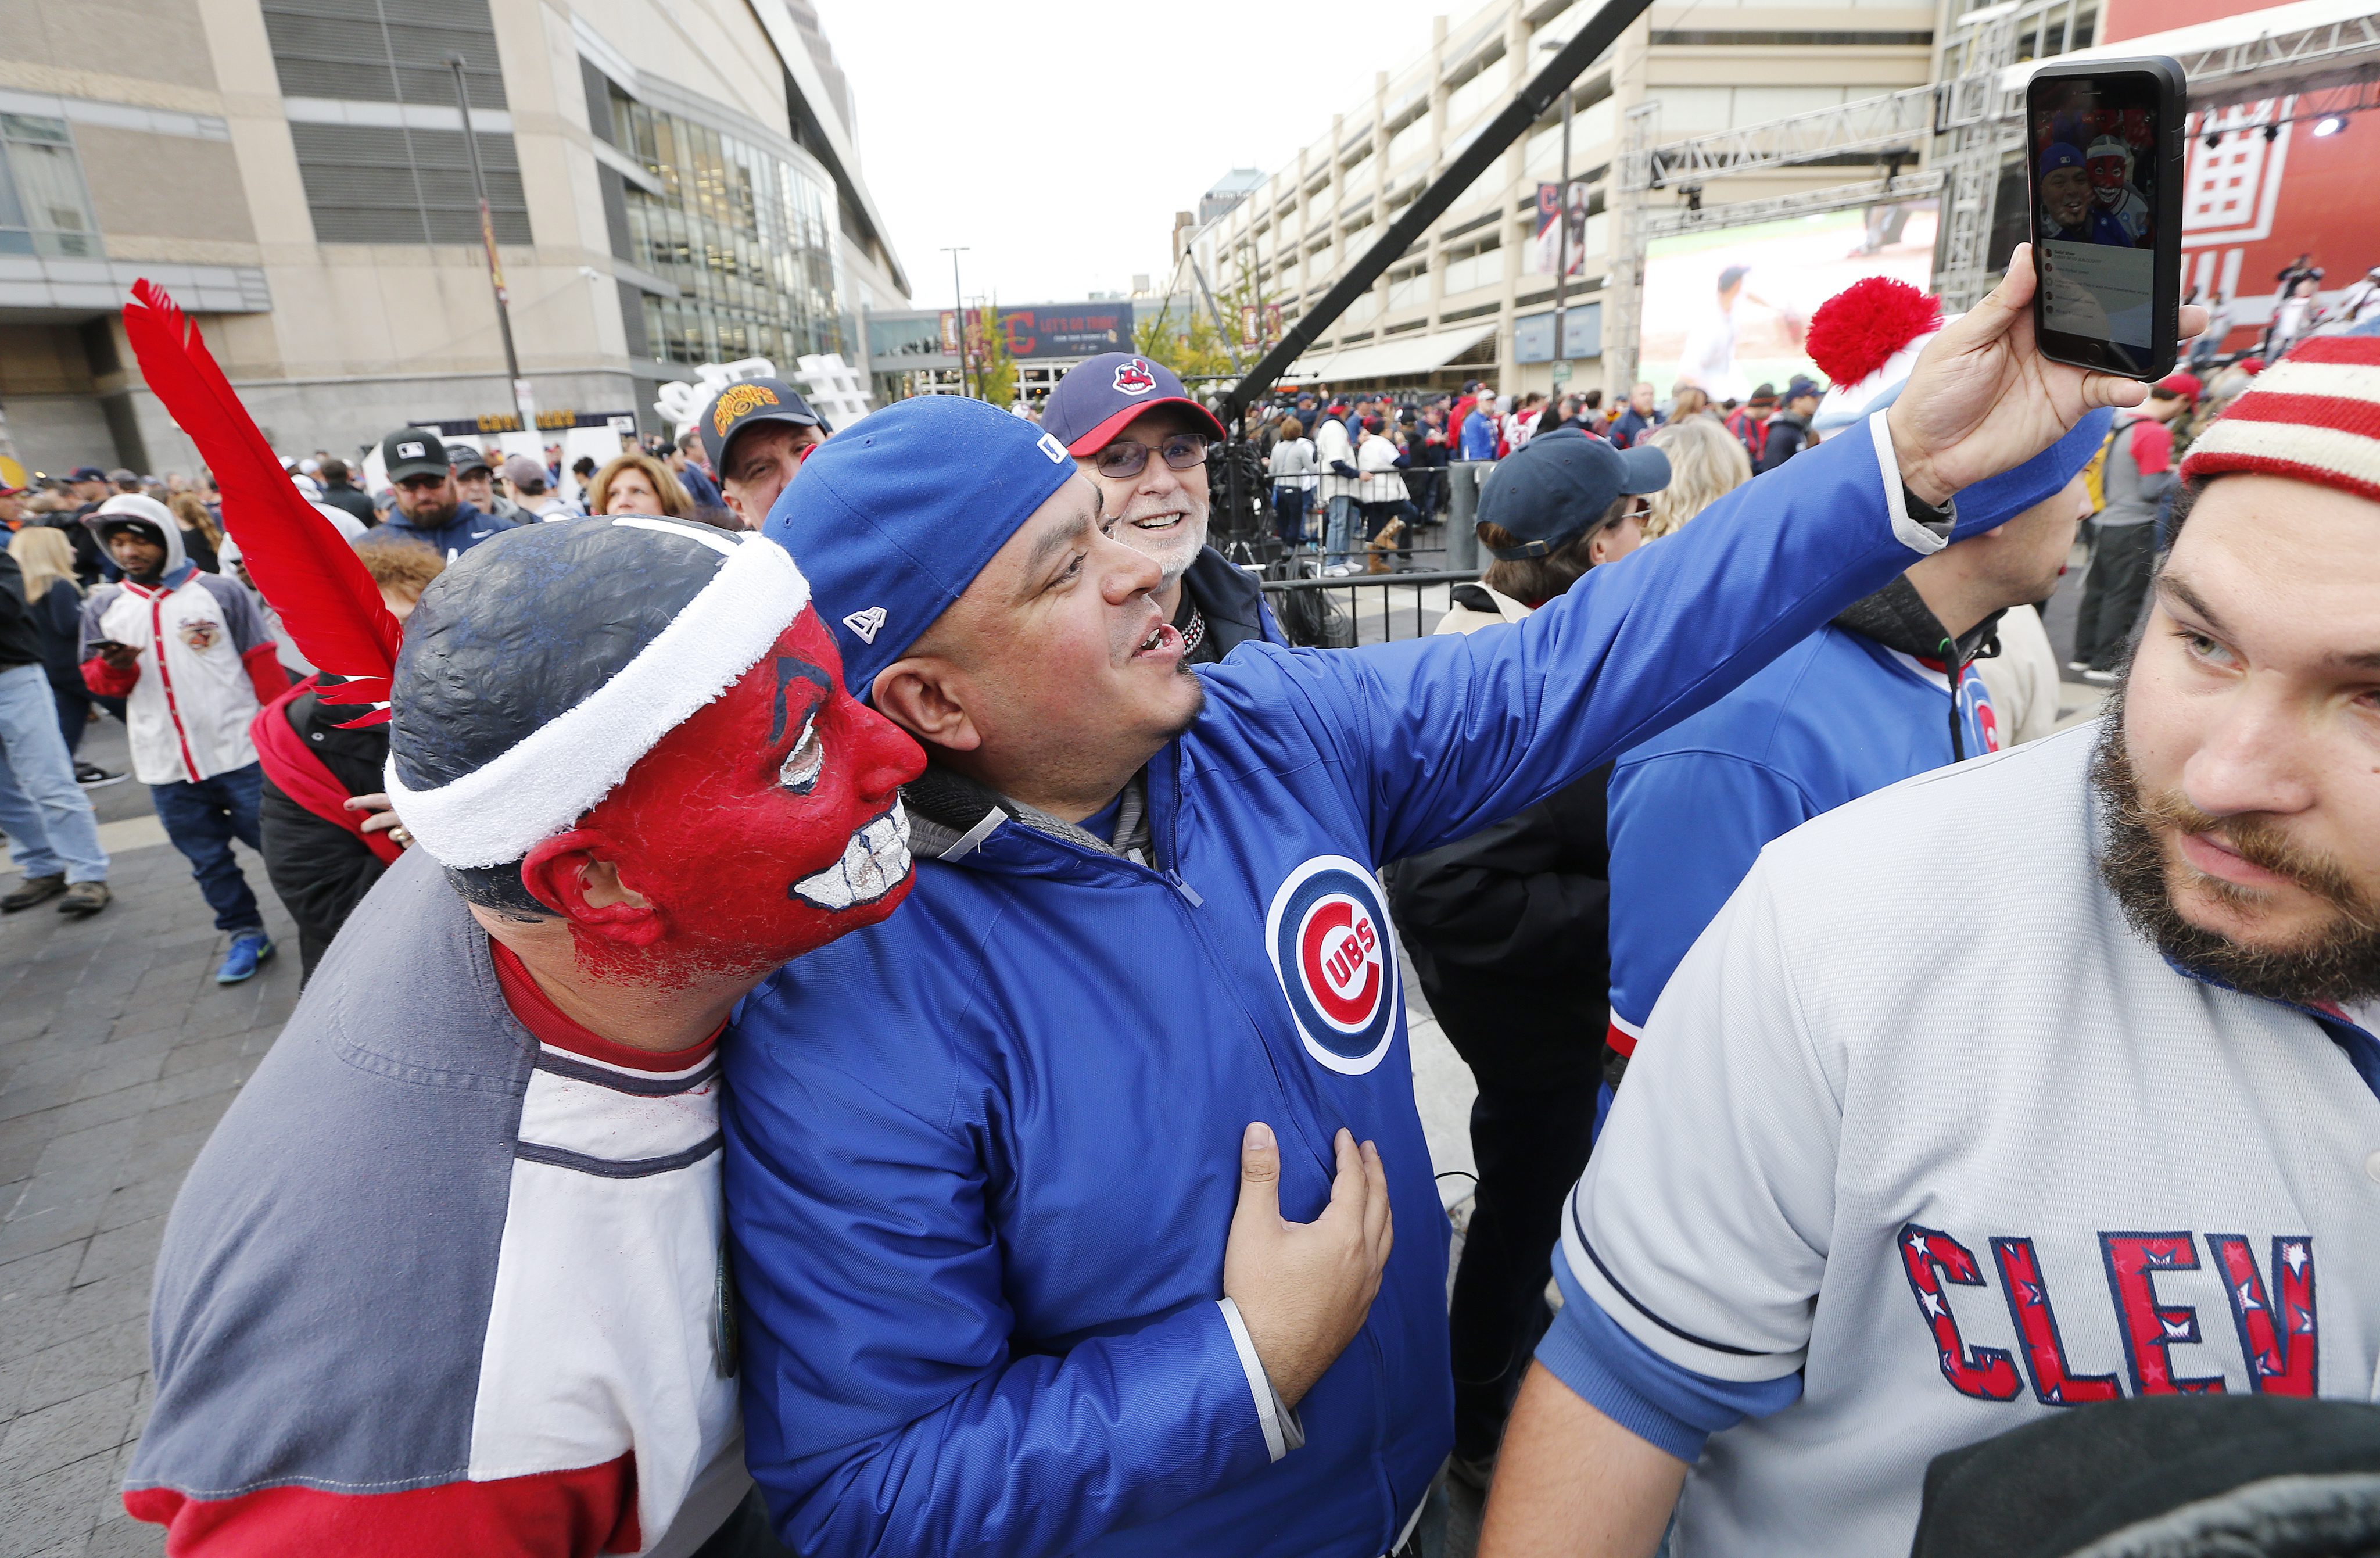 epa05602915 A Cleveland Indians fan (L) and a Chicago Cubs fan (R) outside before the gates opened for game one of the World Series between the Chicago Cubs and the Cleveland Indians at Progressive Field in Cleveland, Ohio, USA, 25 October 2016. The best-of-seven series will be played with games first in Cleveland, then Chicago and back to Cleveland if necessary. EPA/JOHN G. MABANGLO ORG XMIT: MCX019